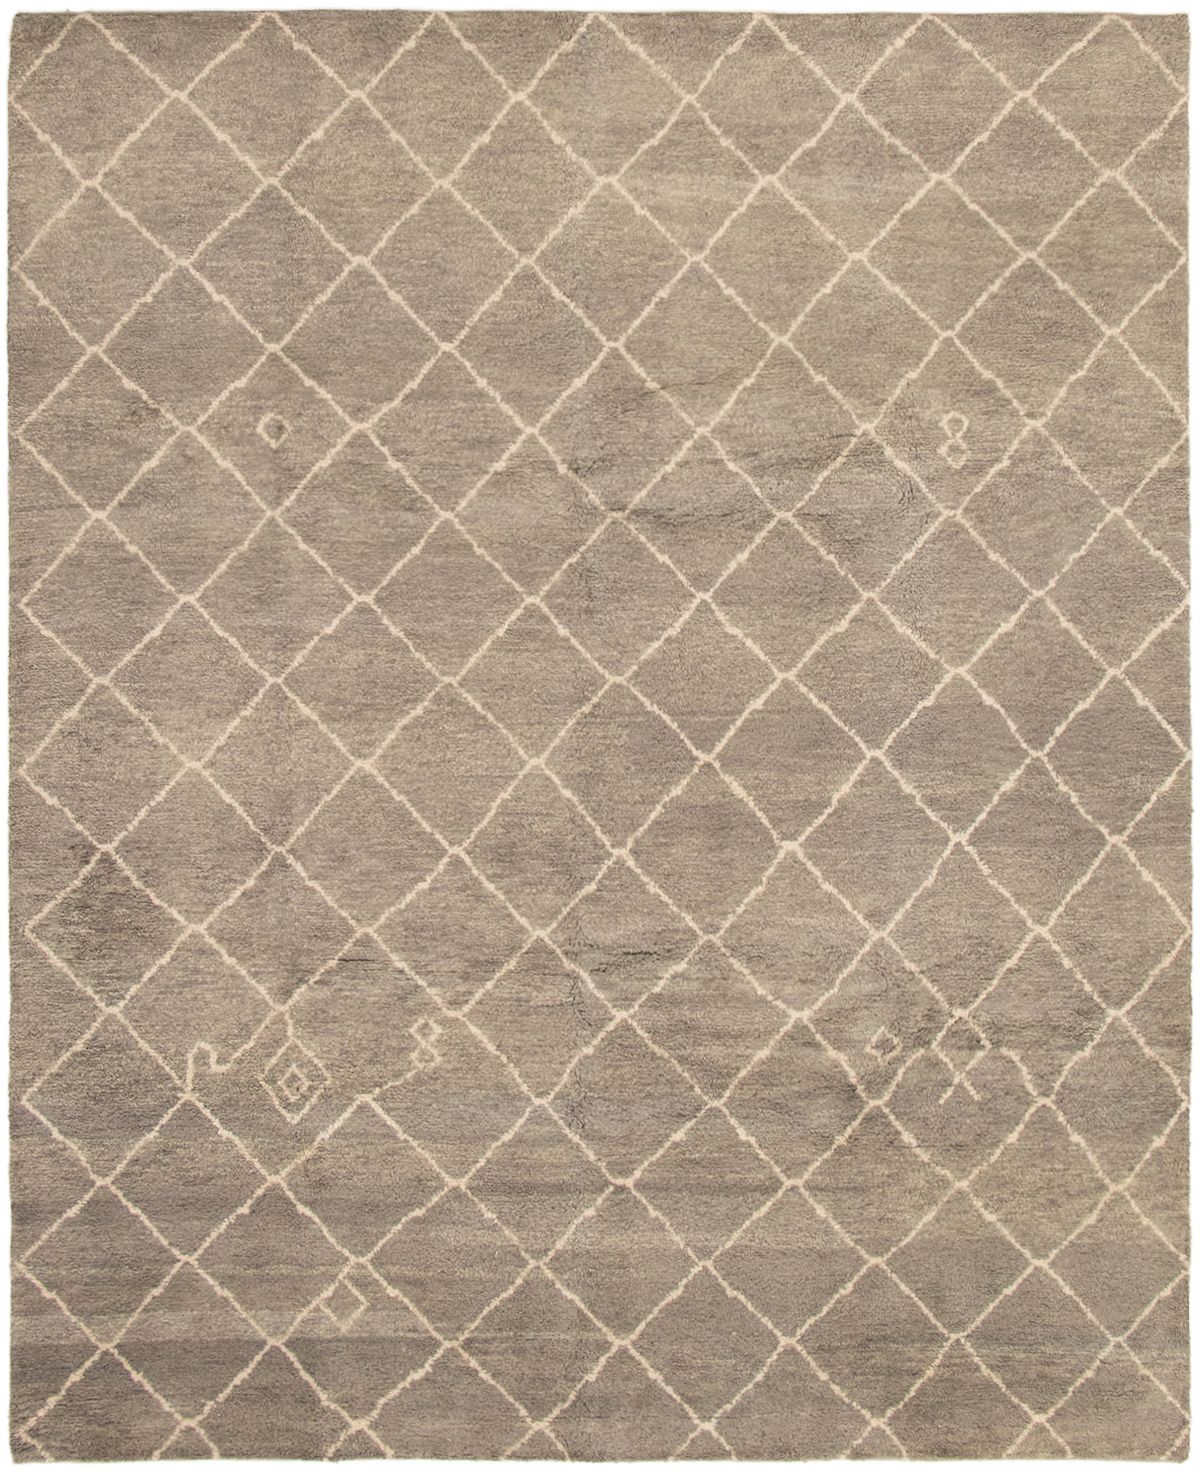 Hand-knotted Arlequin Grey Wool Rug 8'0" x 9'10"  Size: 8'0" x 9'10"  